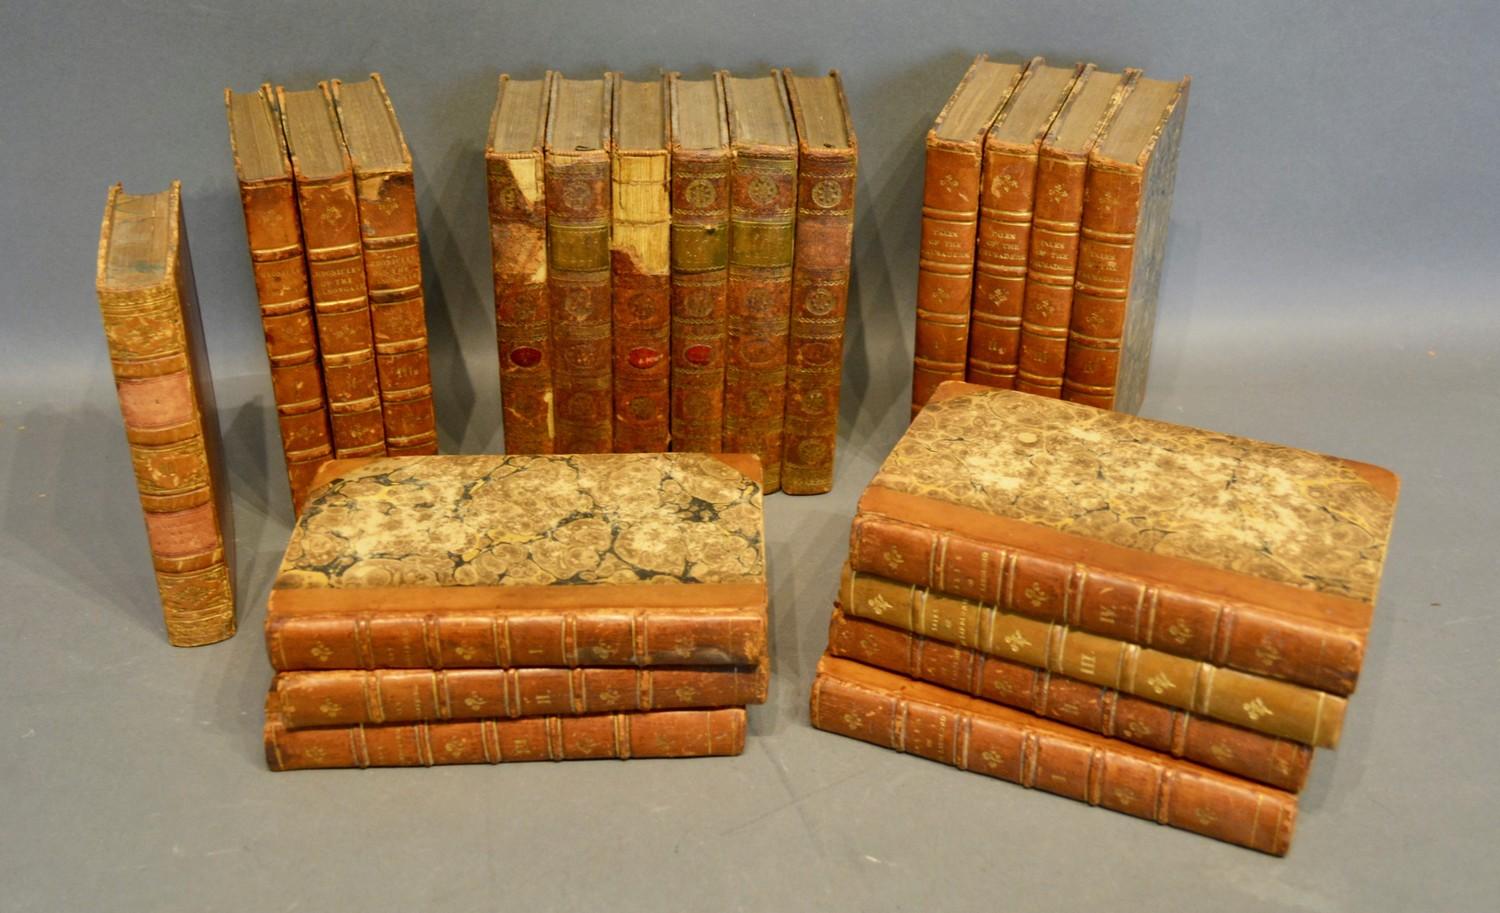 The Works of Alexander Pope, printed by James Donaldson, Edinburgh, 1789, within six leather bound